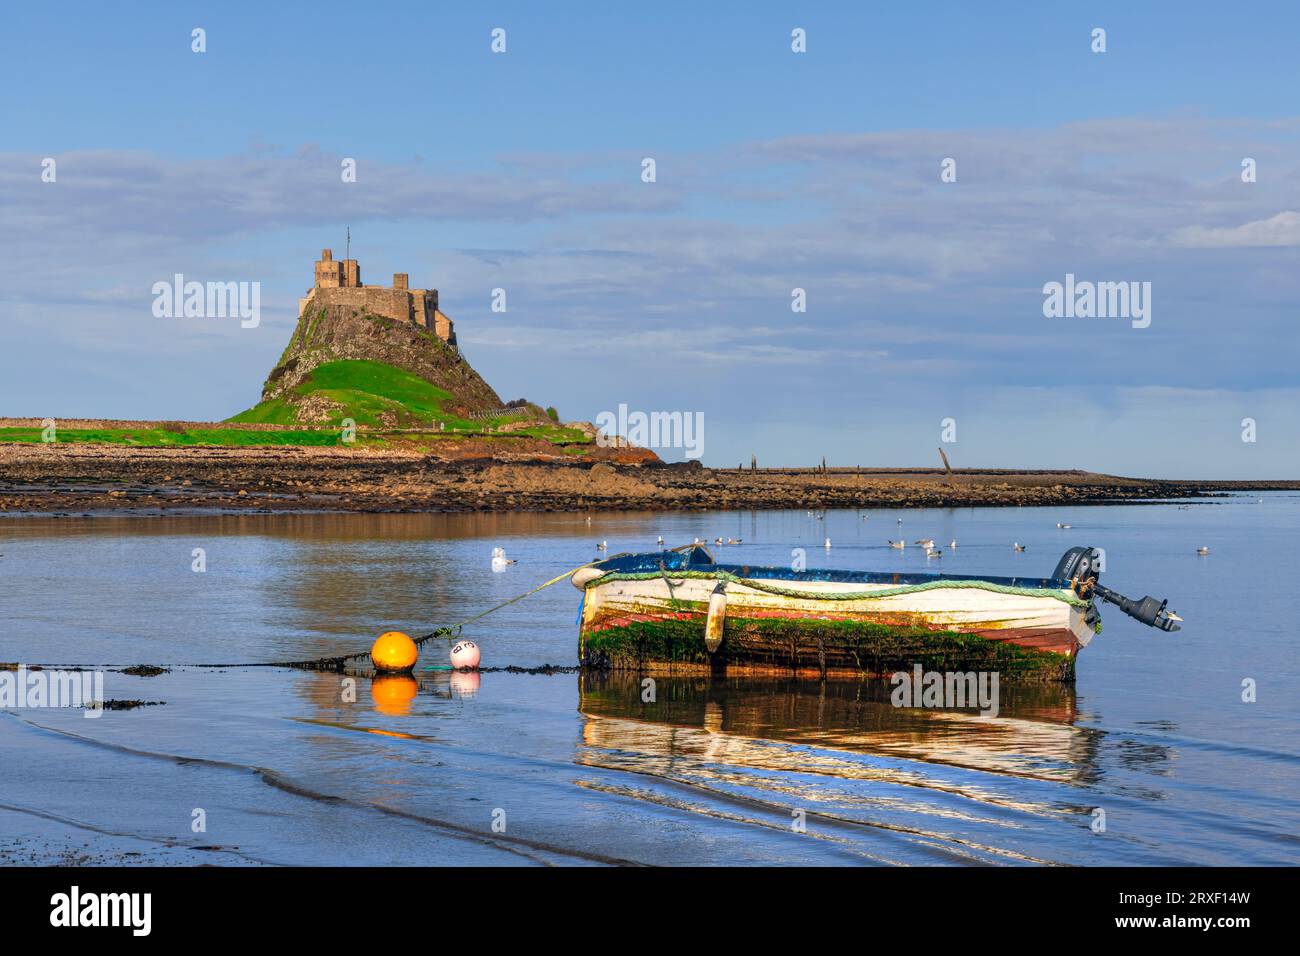 The tidal island of Llindisfarne, also called Holy Island, in Northumberland, England Stock Photo